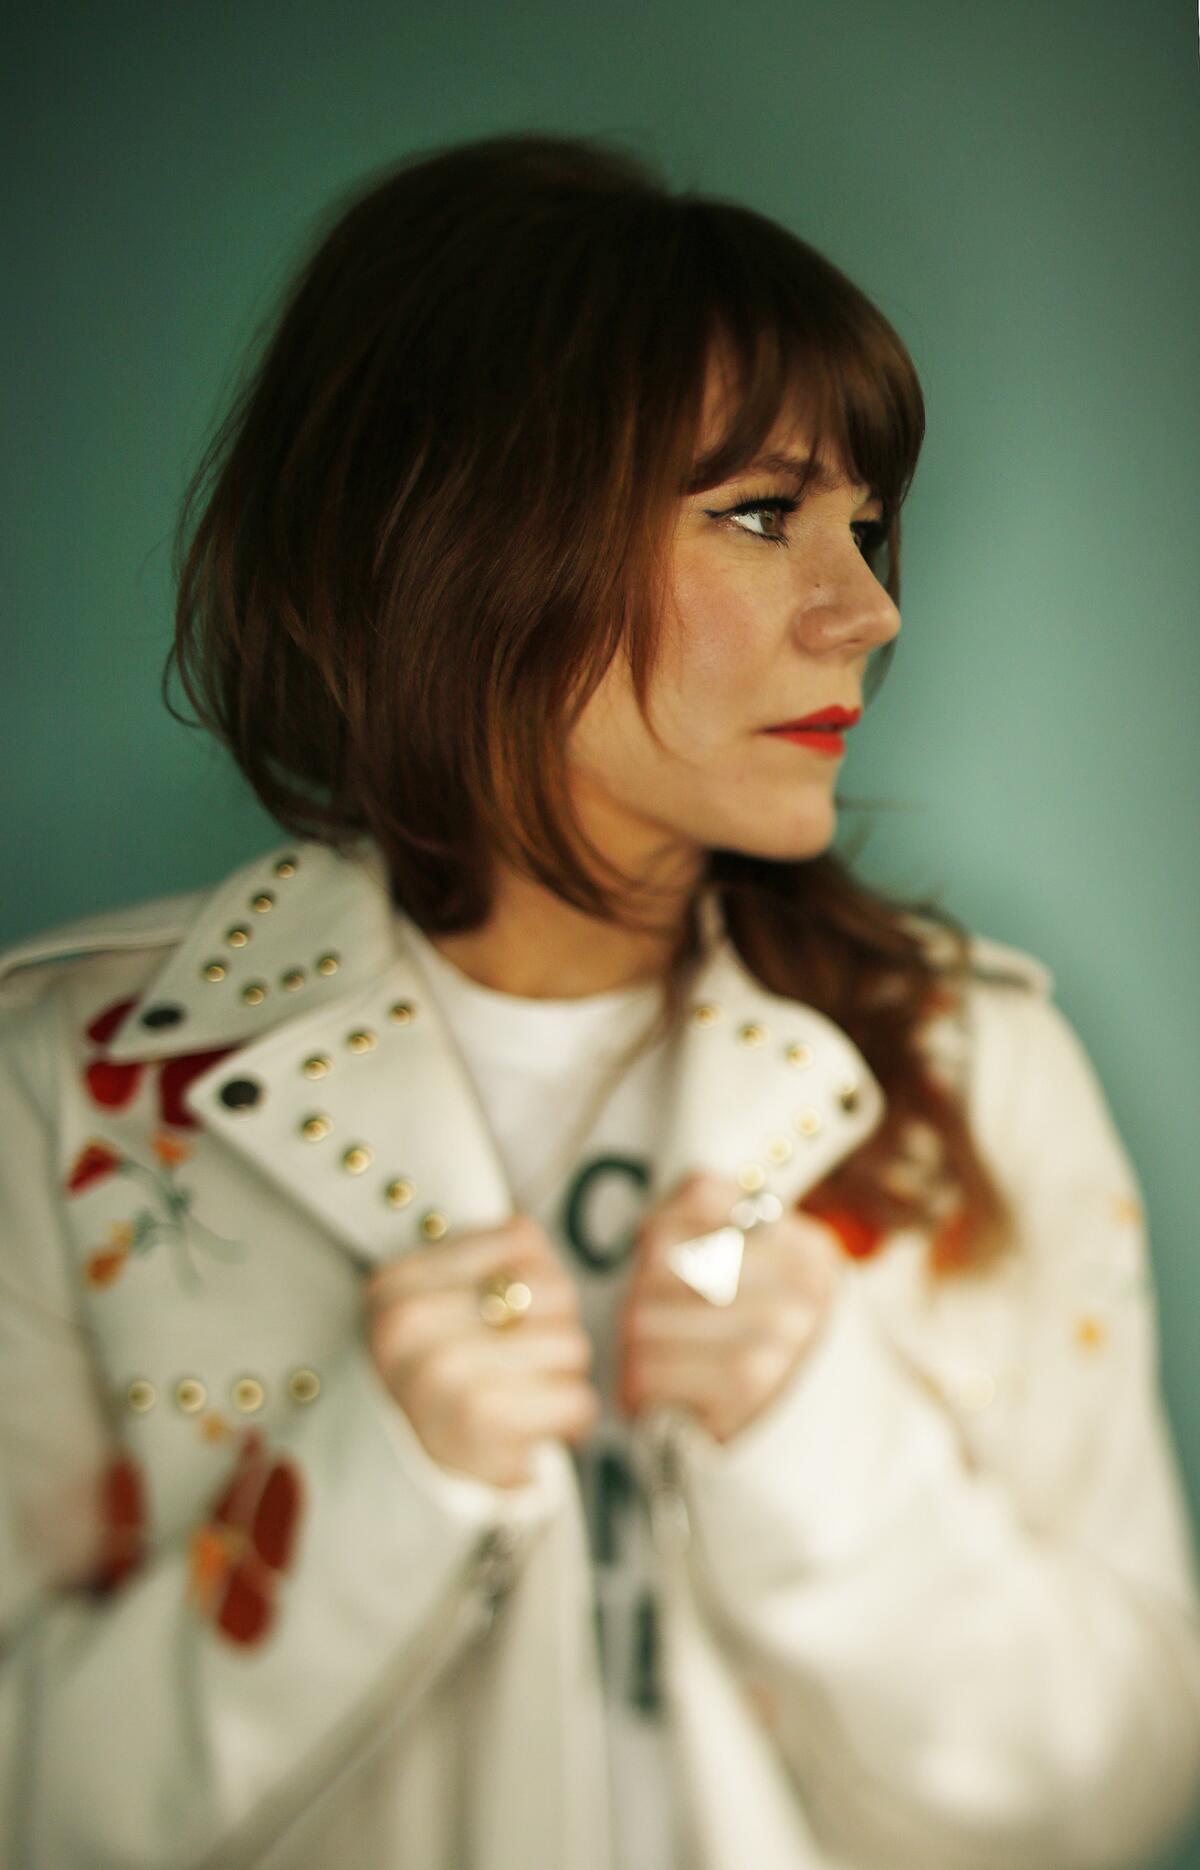 Jenny Lewis' fourth solo album, “On the Line,” is due March 22.